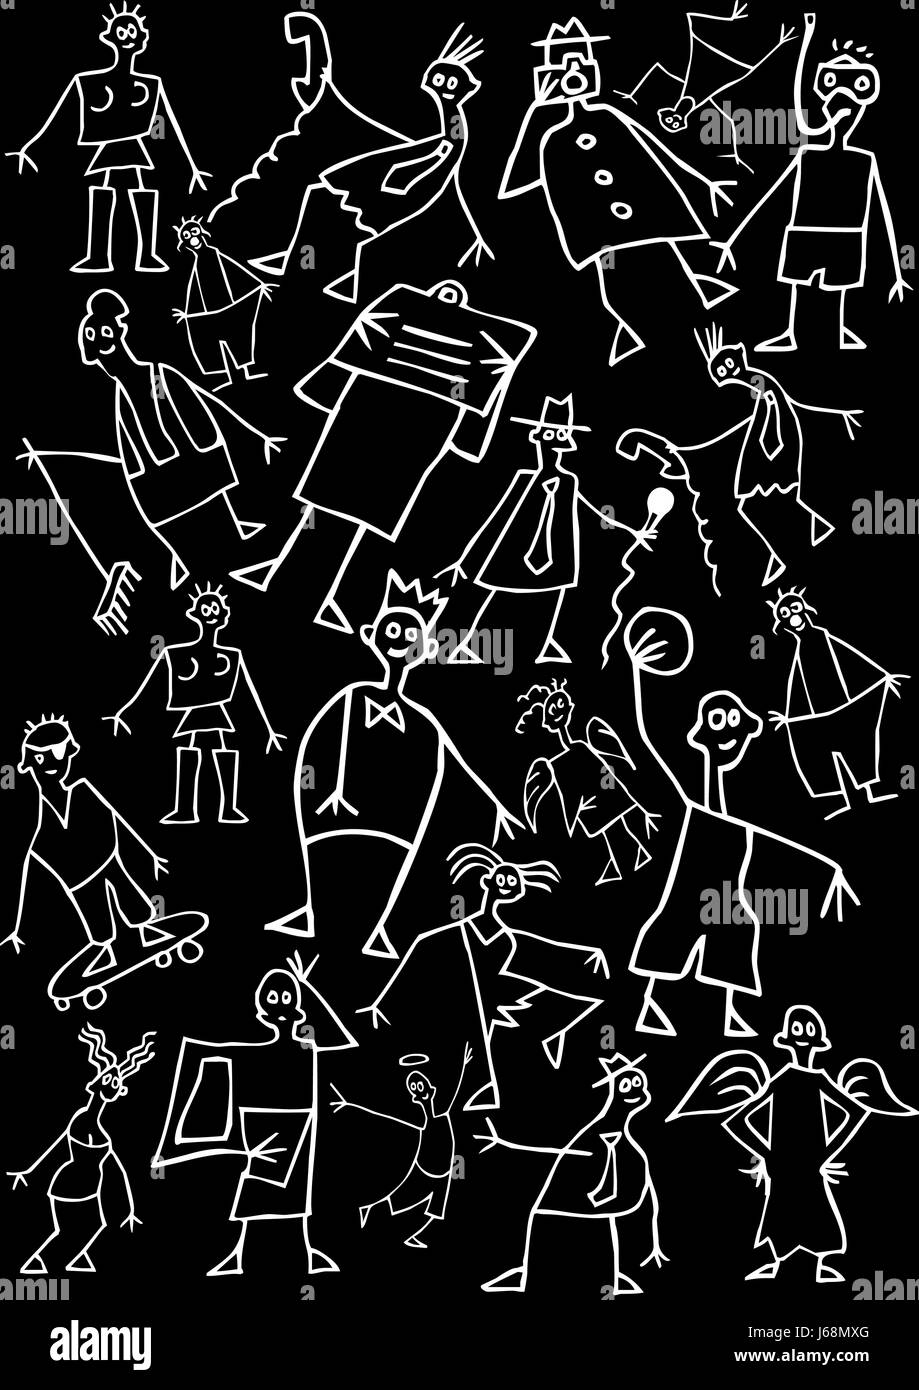 black with white figure outlined Stock Photo